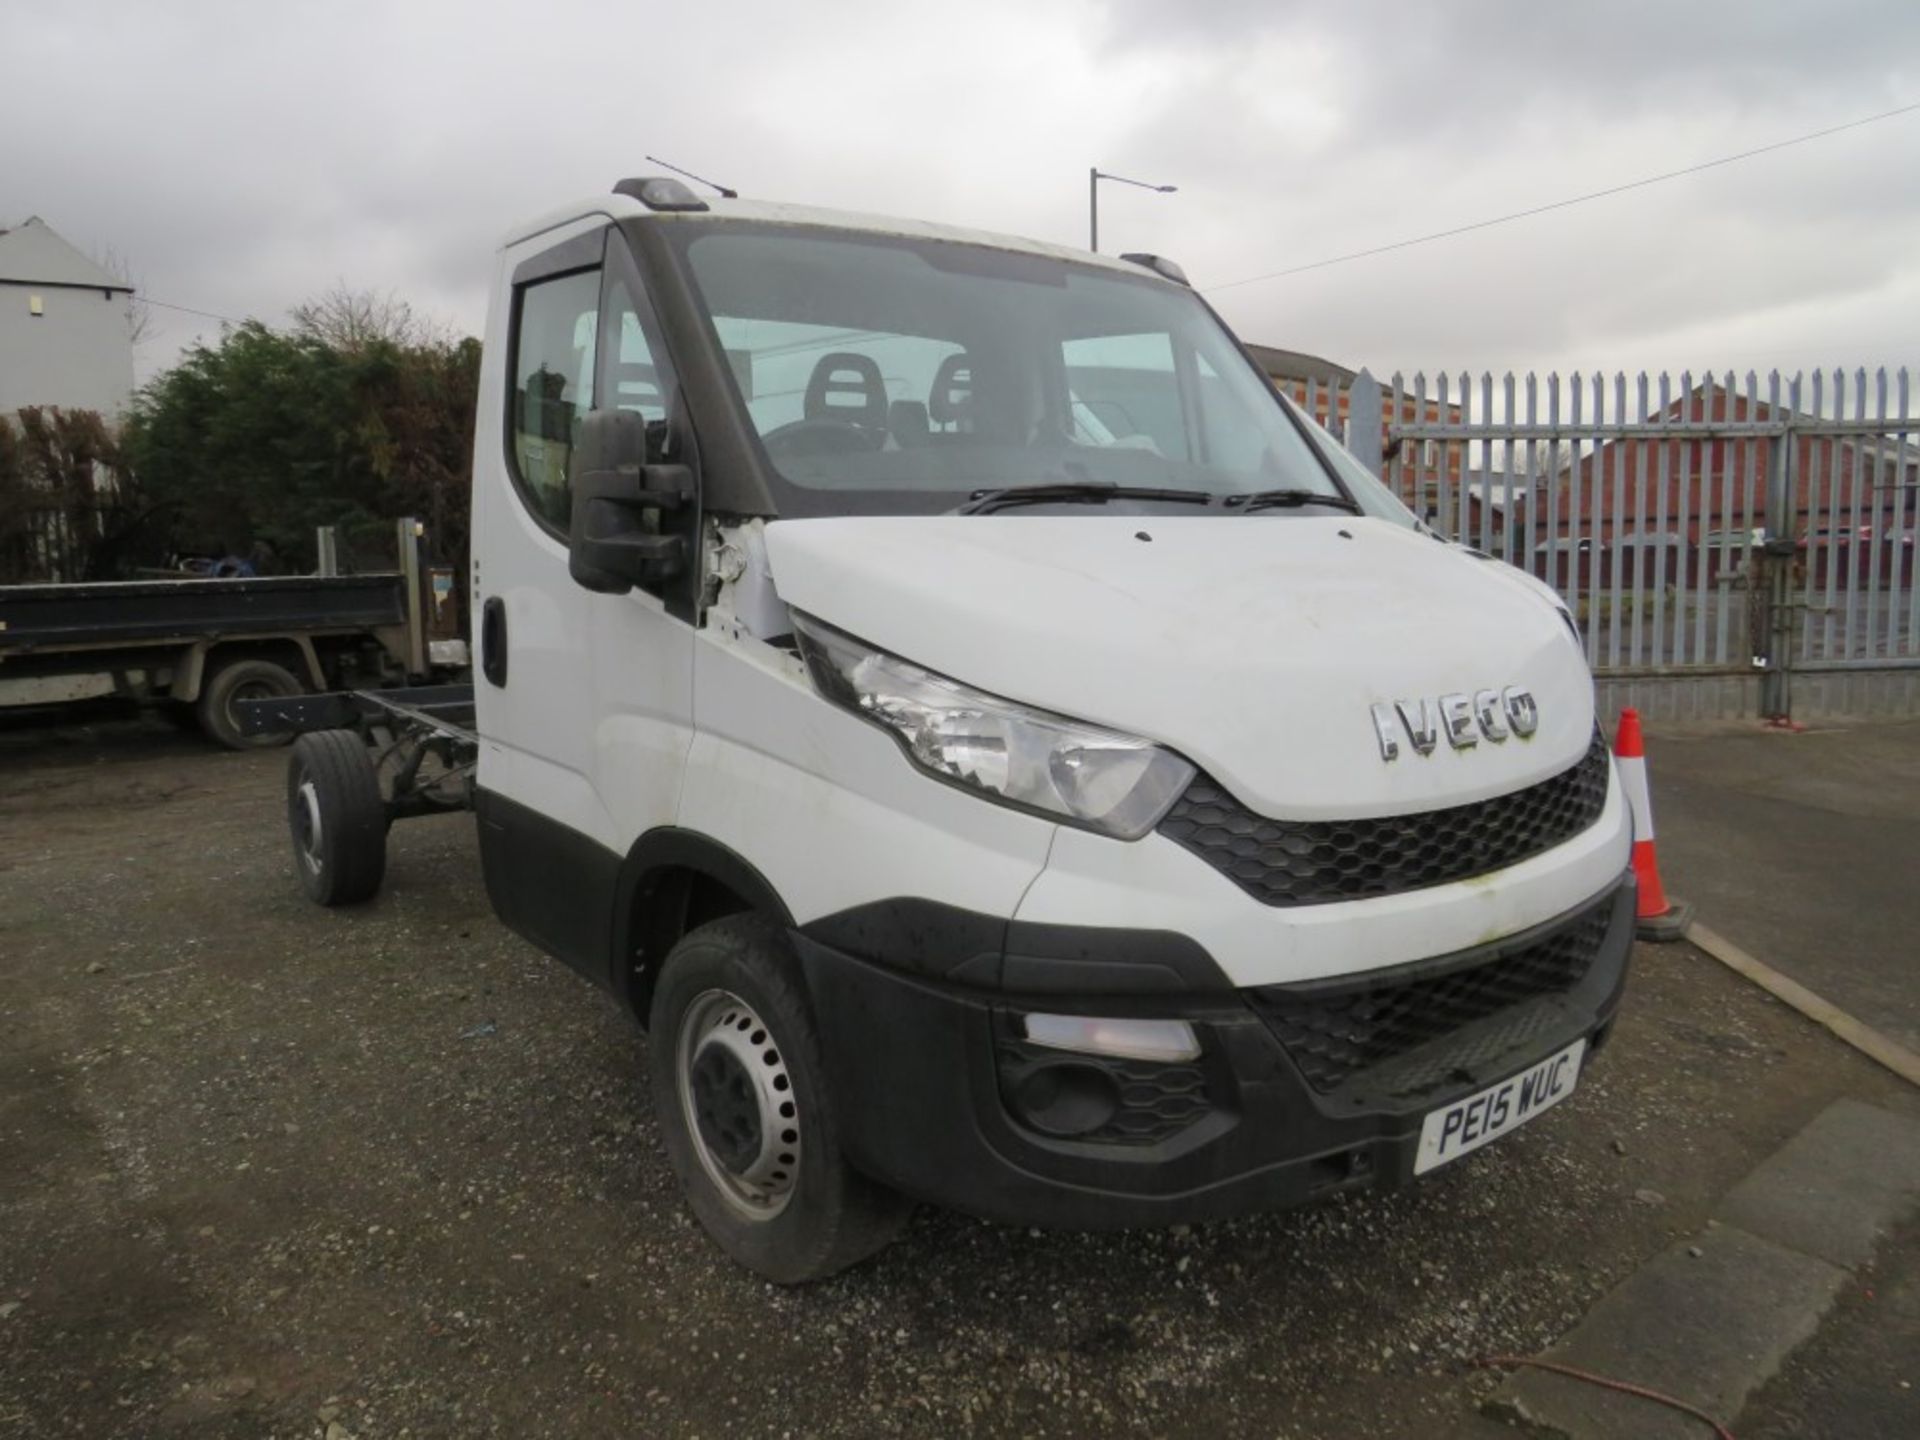 15 reg IVECO DAILY 35S13 CHASSIS CAB (NON RUNNER) 1ST REG 04/15, 5000M ONLY WARRANTED, V5 HERE, 1